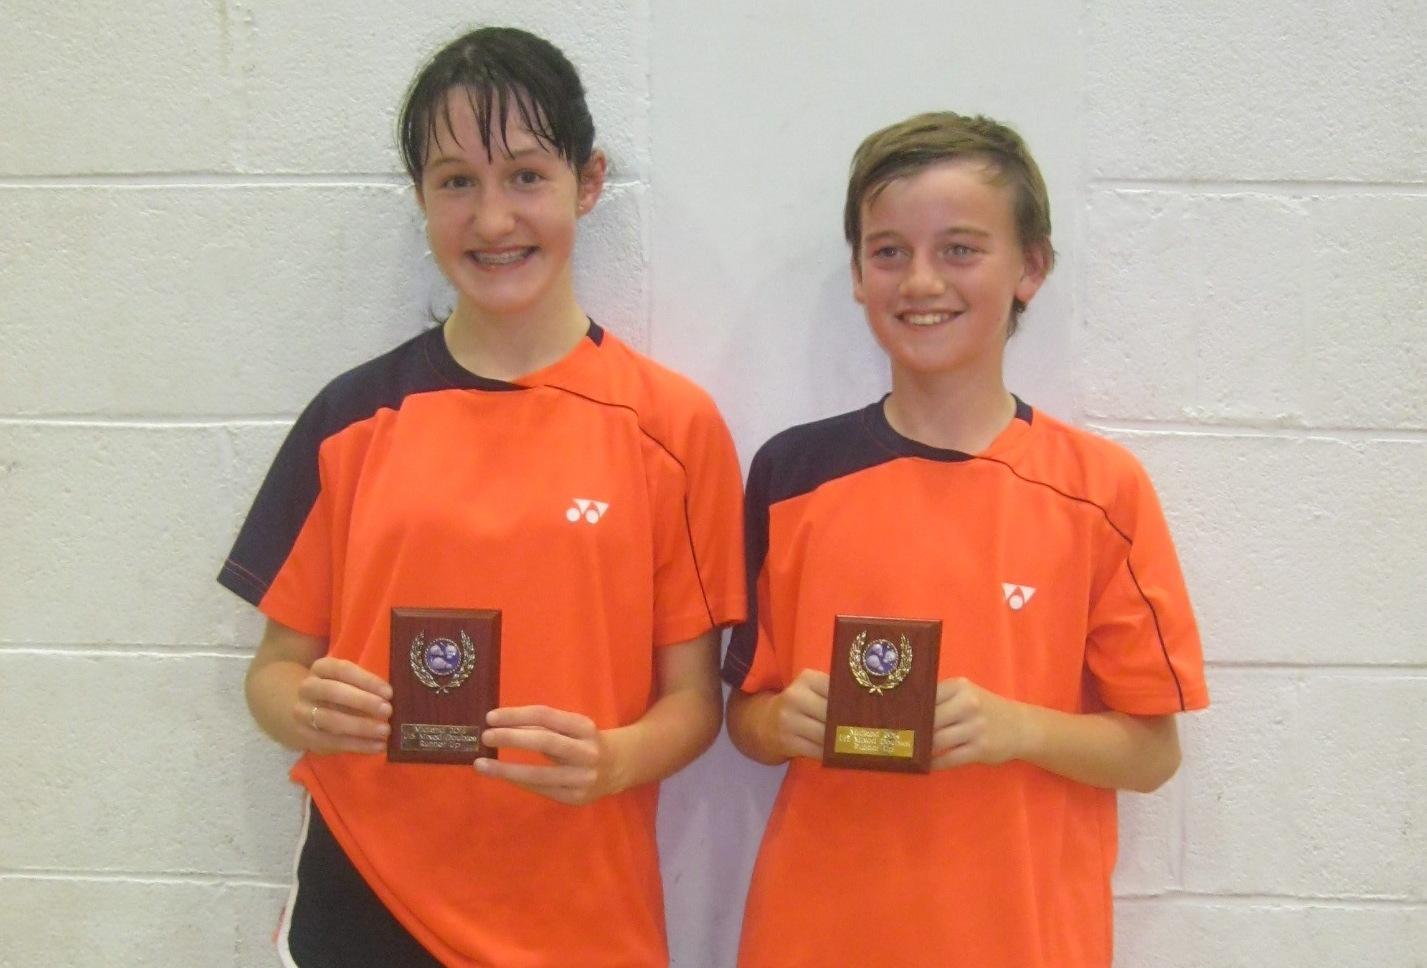 RACHEL AND JAMES SHINE IN FIRST TOURNAMENT OF SEASON